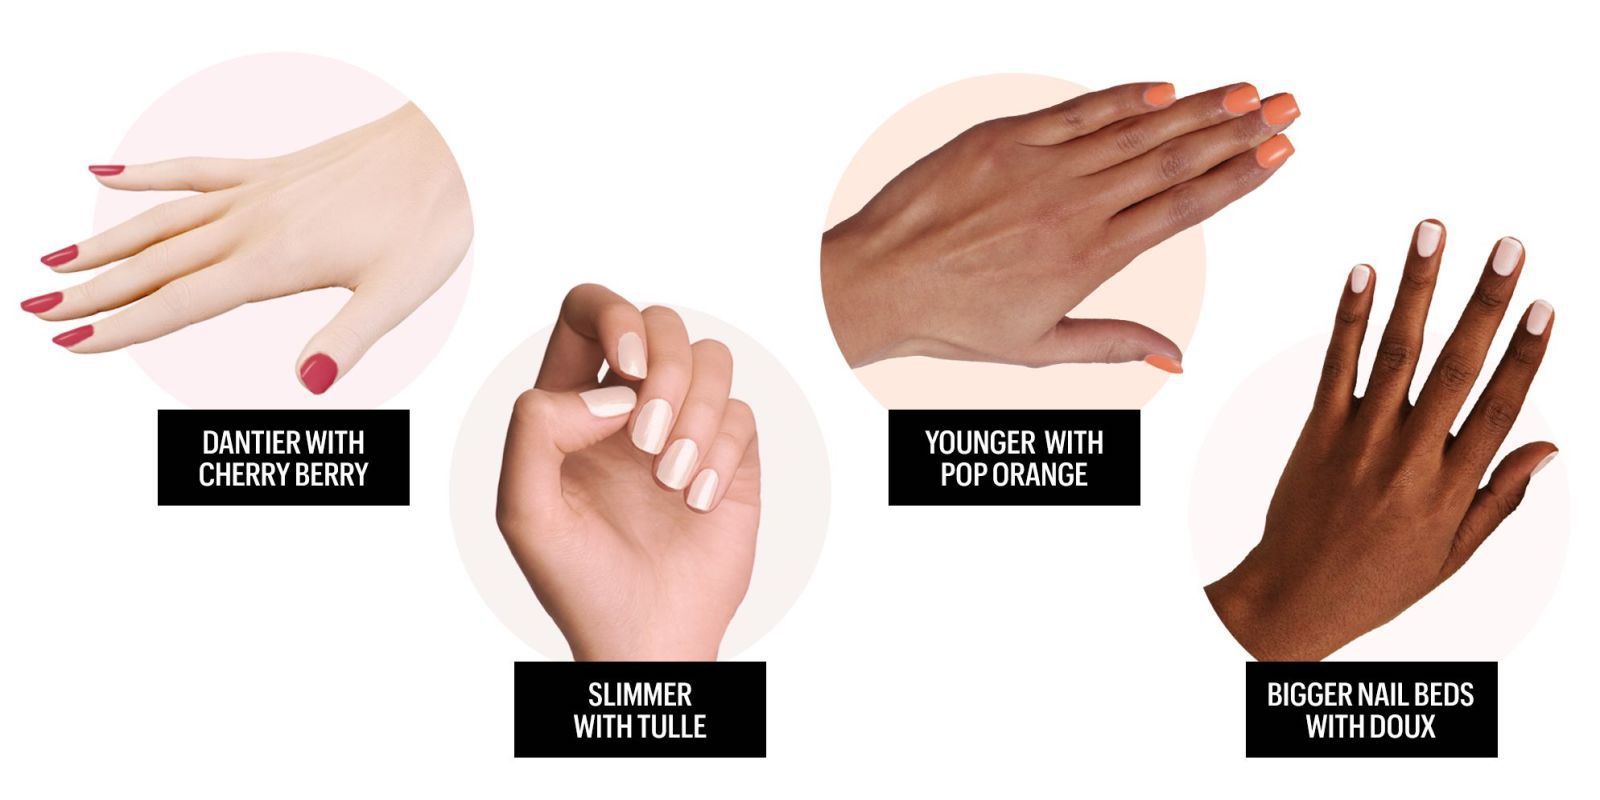 Home Manicure Tip - Which colours make nails longer, slimmer or younger